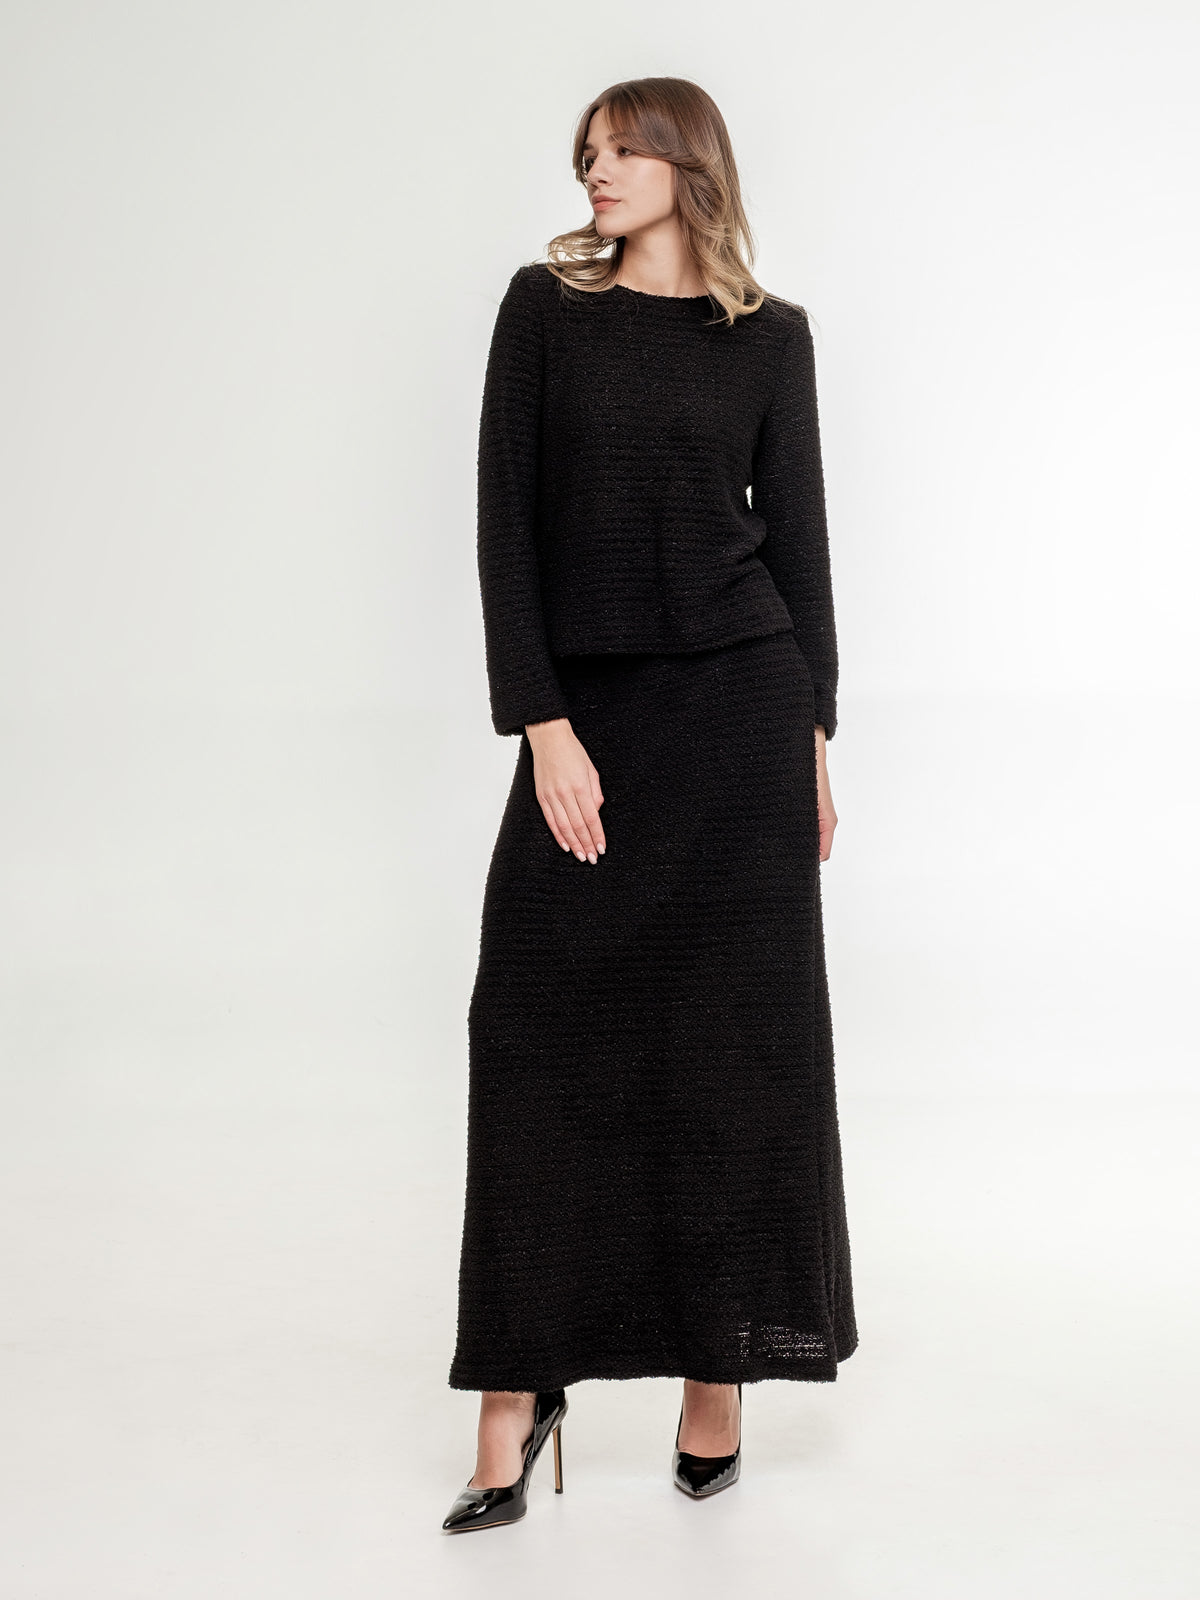 black_textured_top_with_long_sleeves and long skirt model